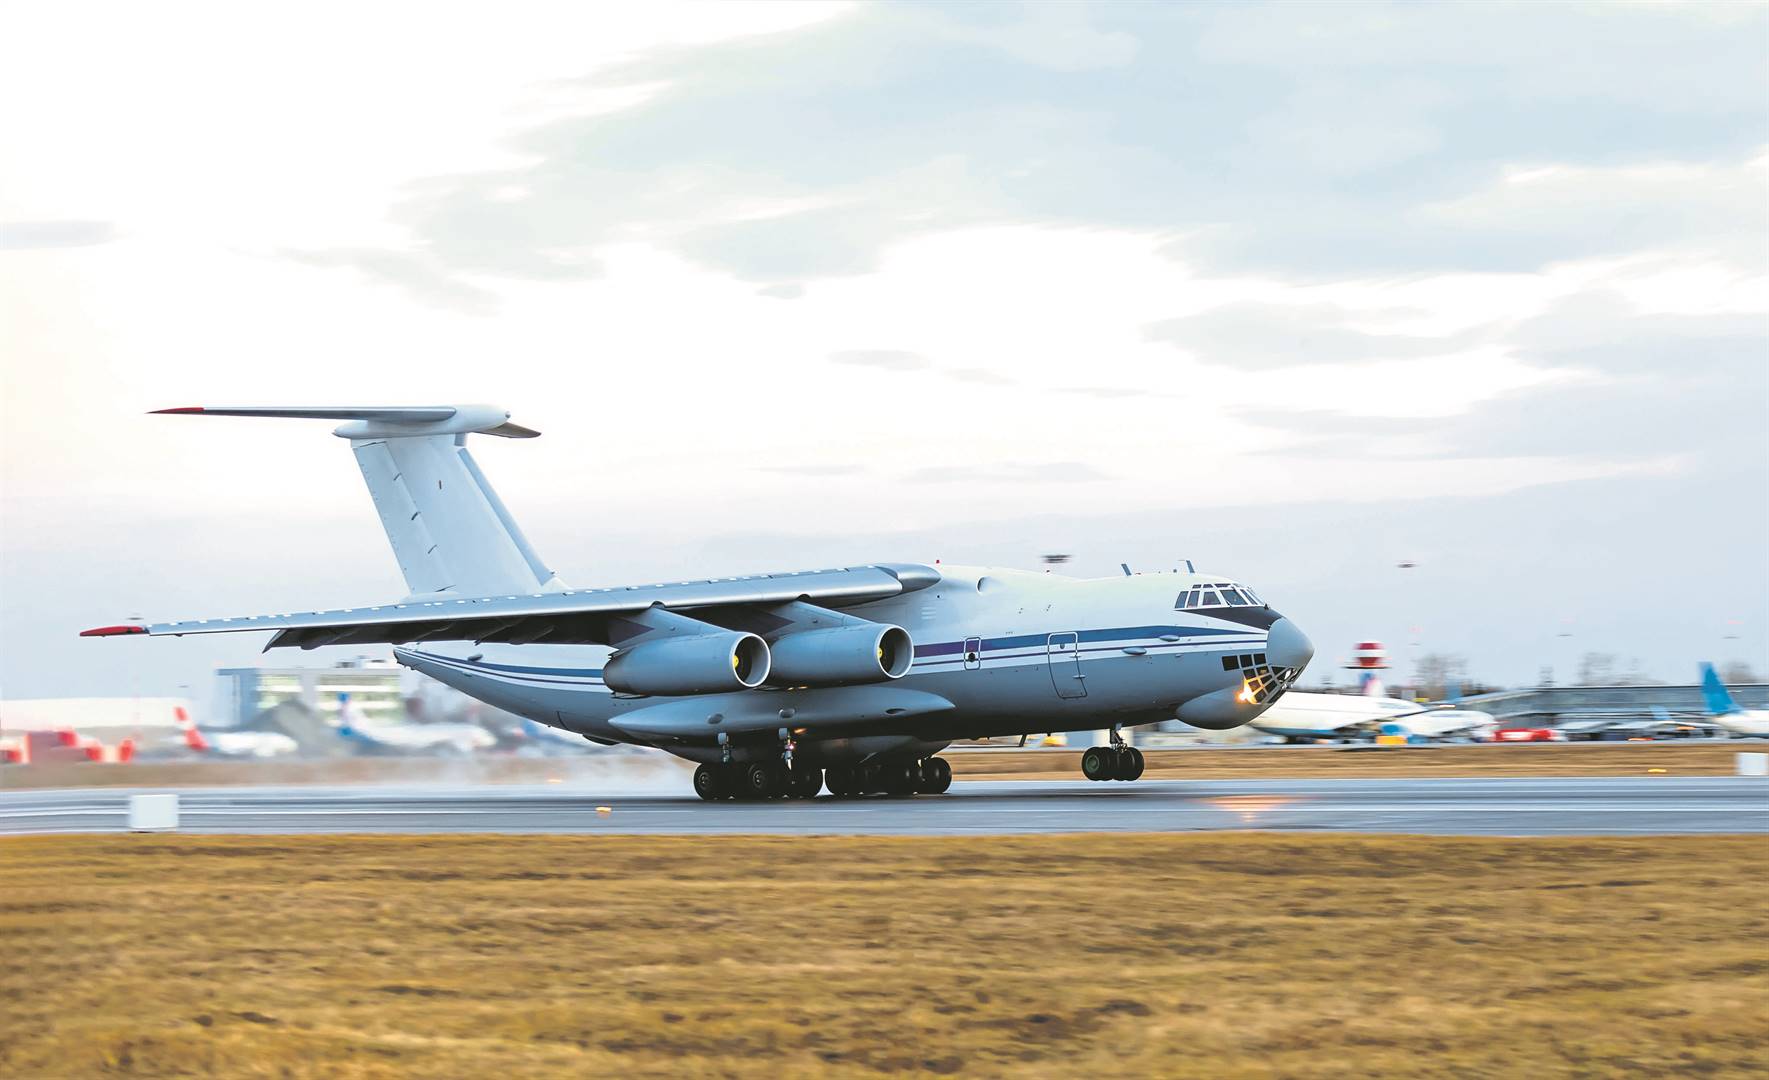 The daily flights, handled by four Ilyushin Il-76 cargo planes, were initially to be paid for by the DRC government